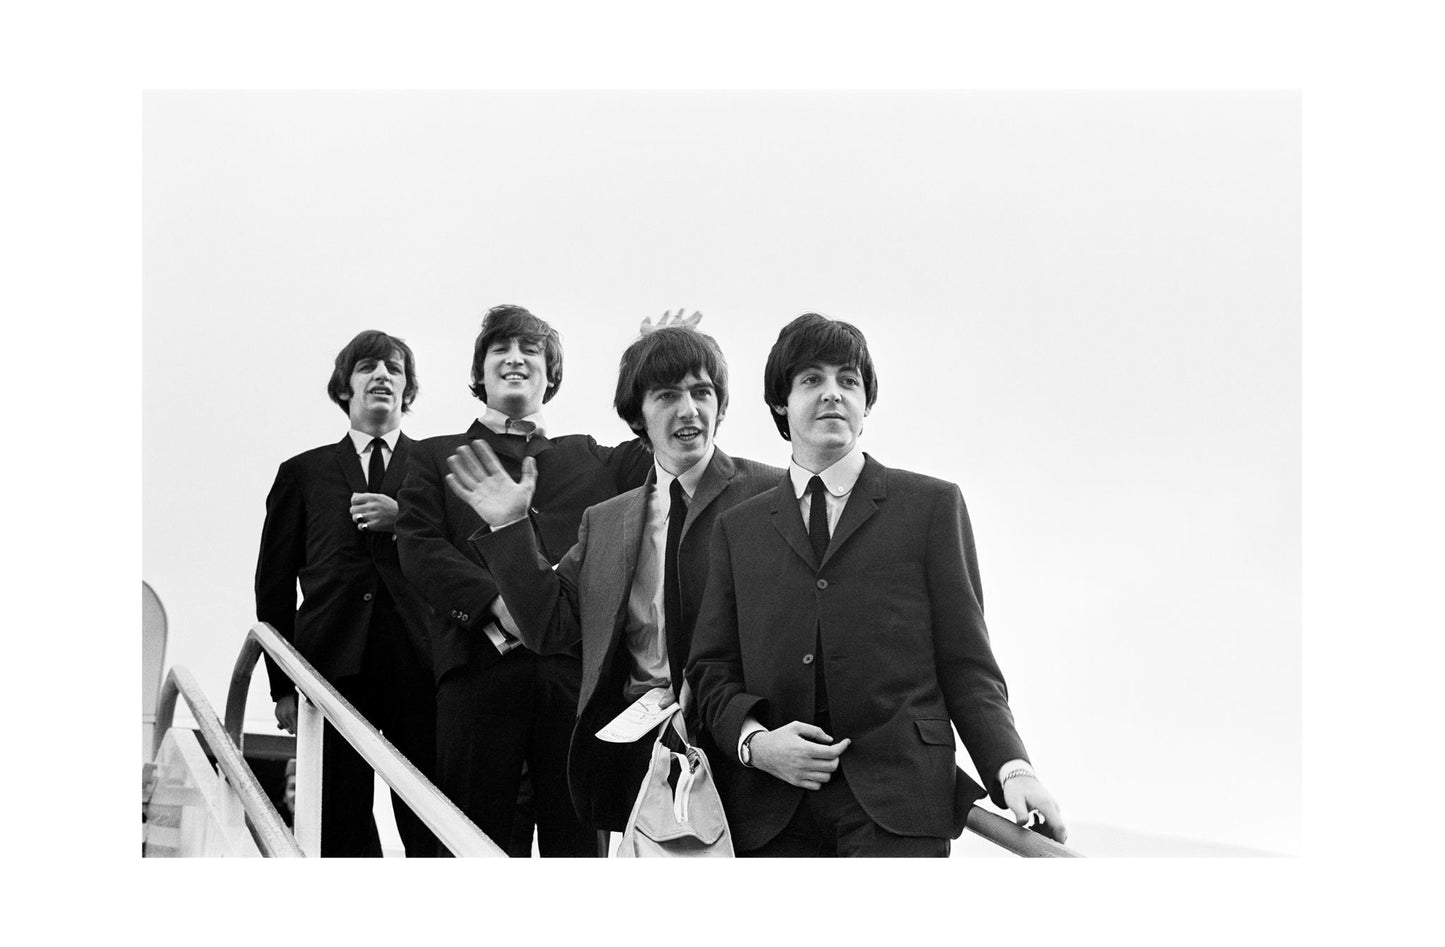 The Beatles - Arriving to the USA, 1964 Print